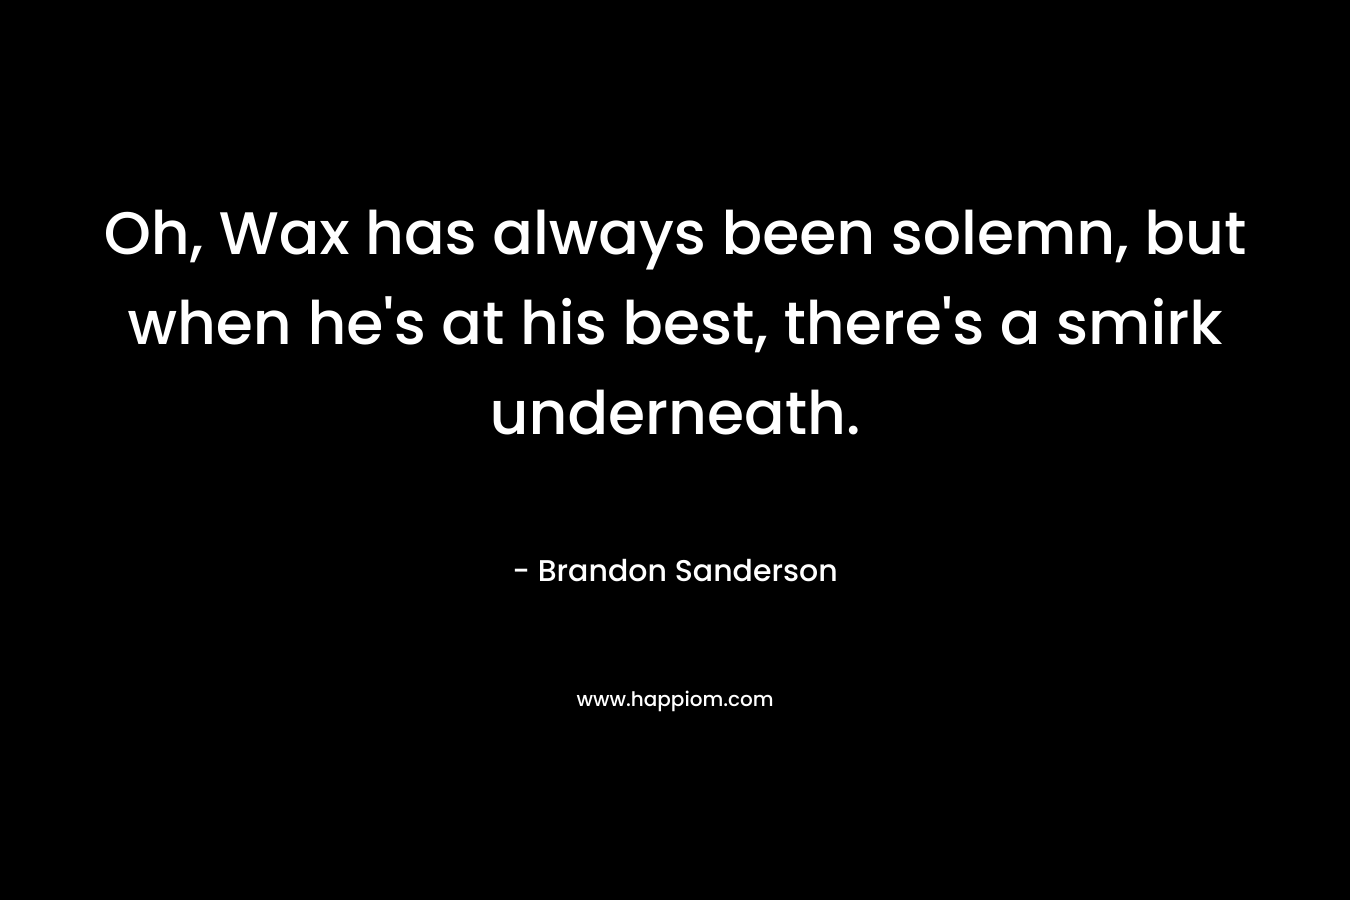 Oh, Wax has always been solemn, but when he's at his best, there's a smirk underneath.